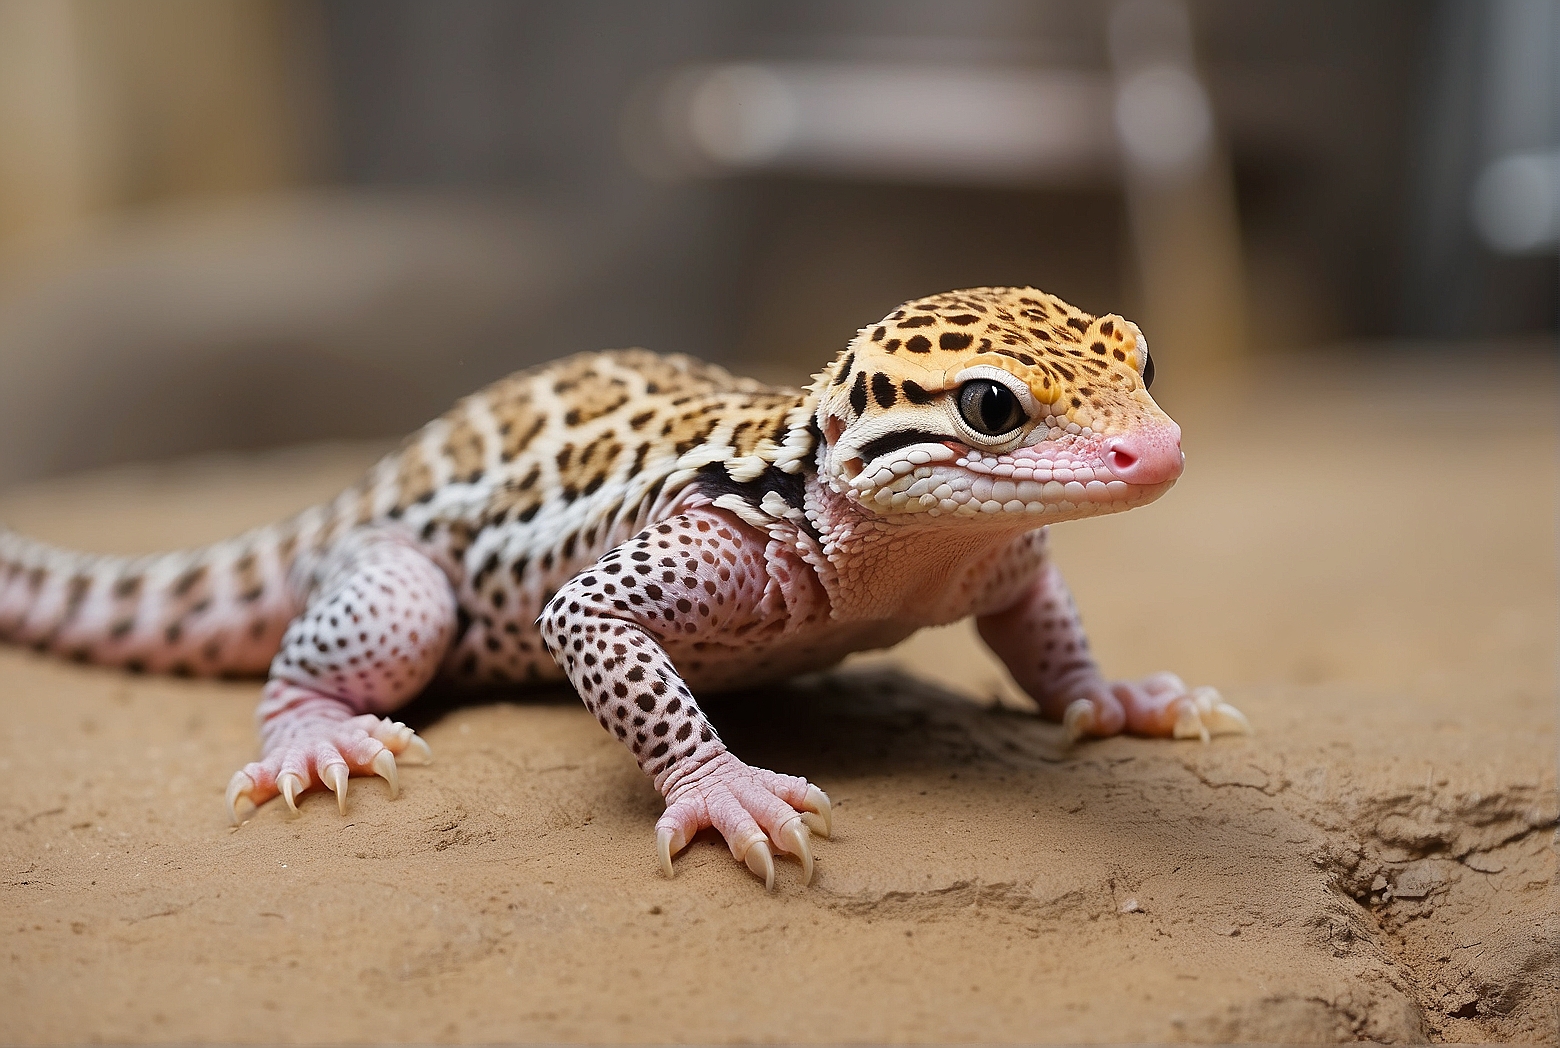 How Long Does It Take For A Leopard Gecko To Grow To Full Size